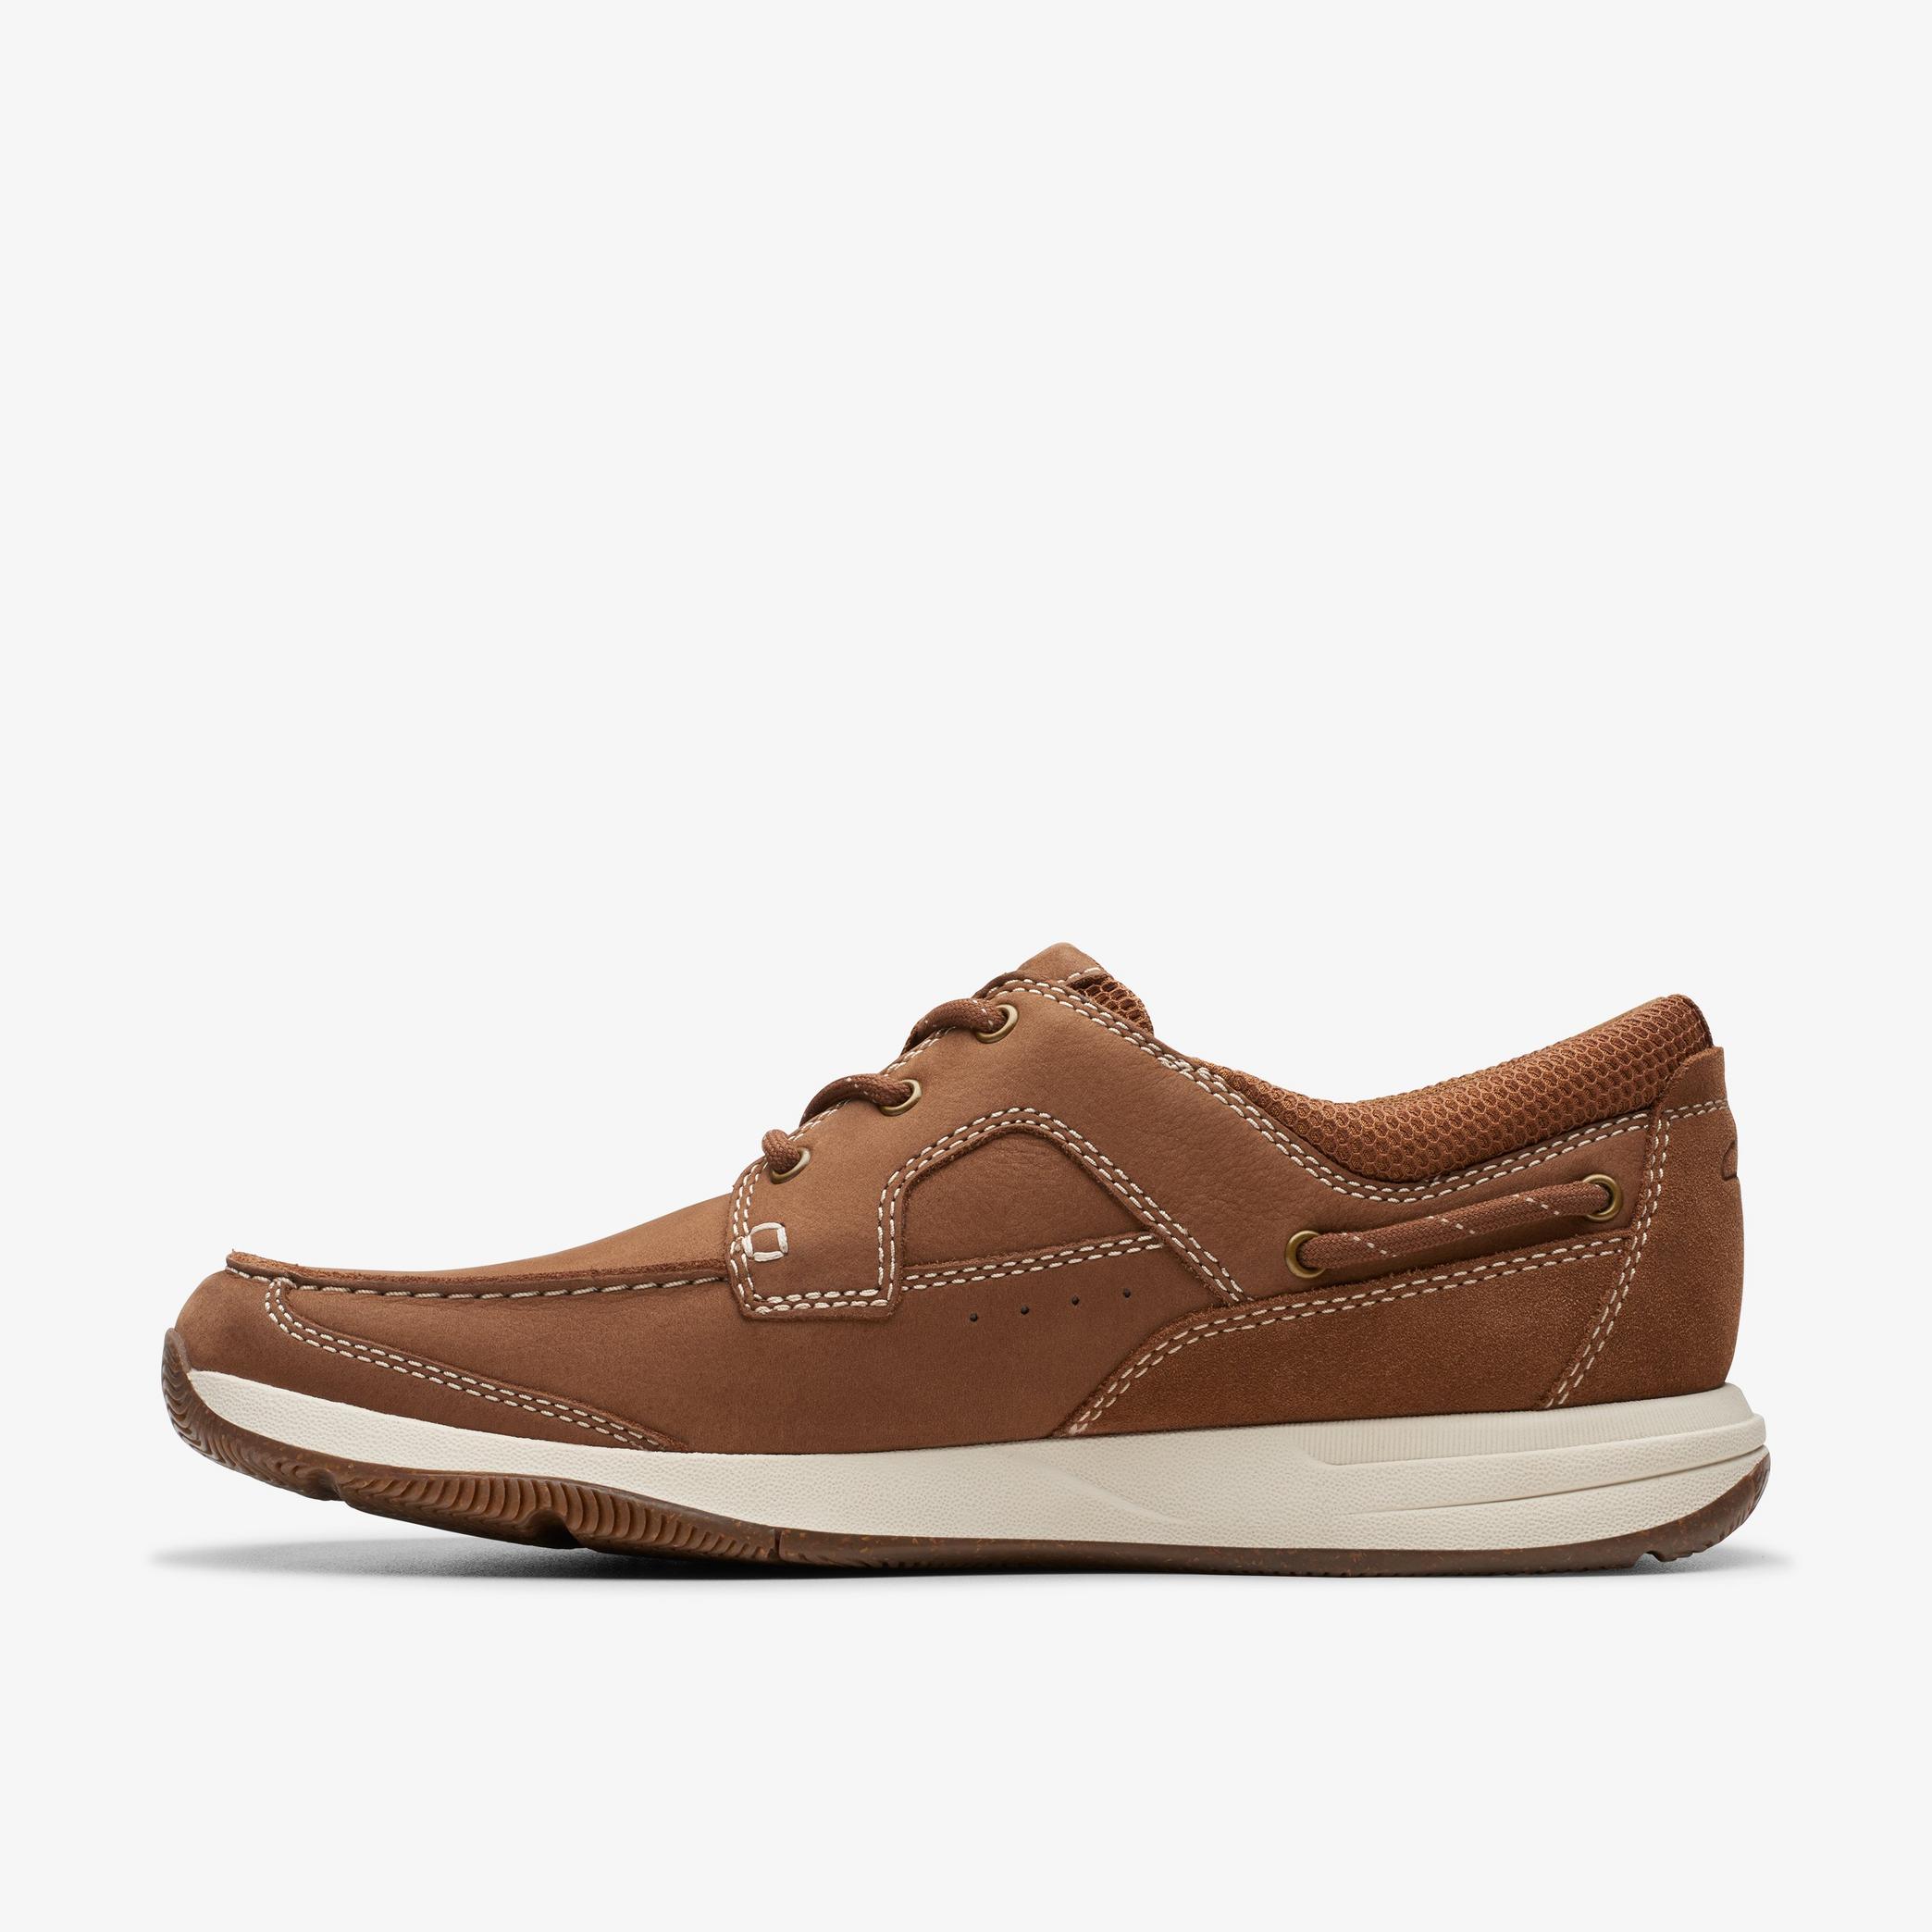 Sailview Lace Light Tan Nubuck Boat Shoes, view 2 of 6